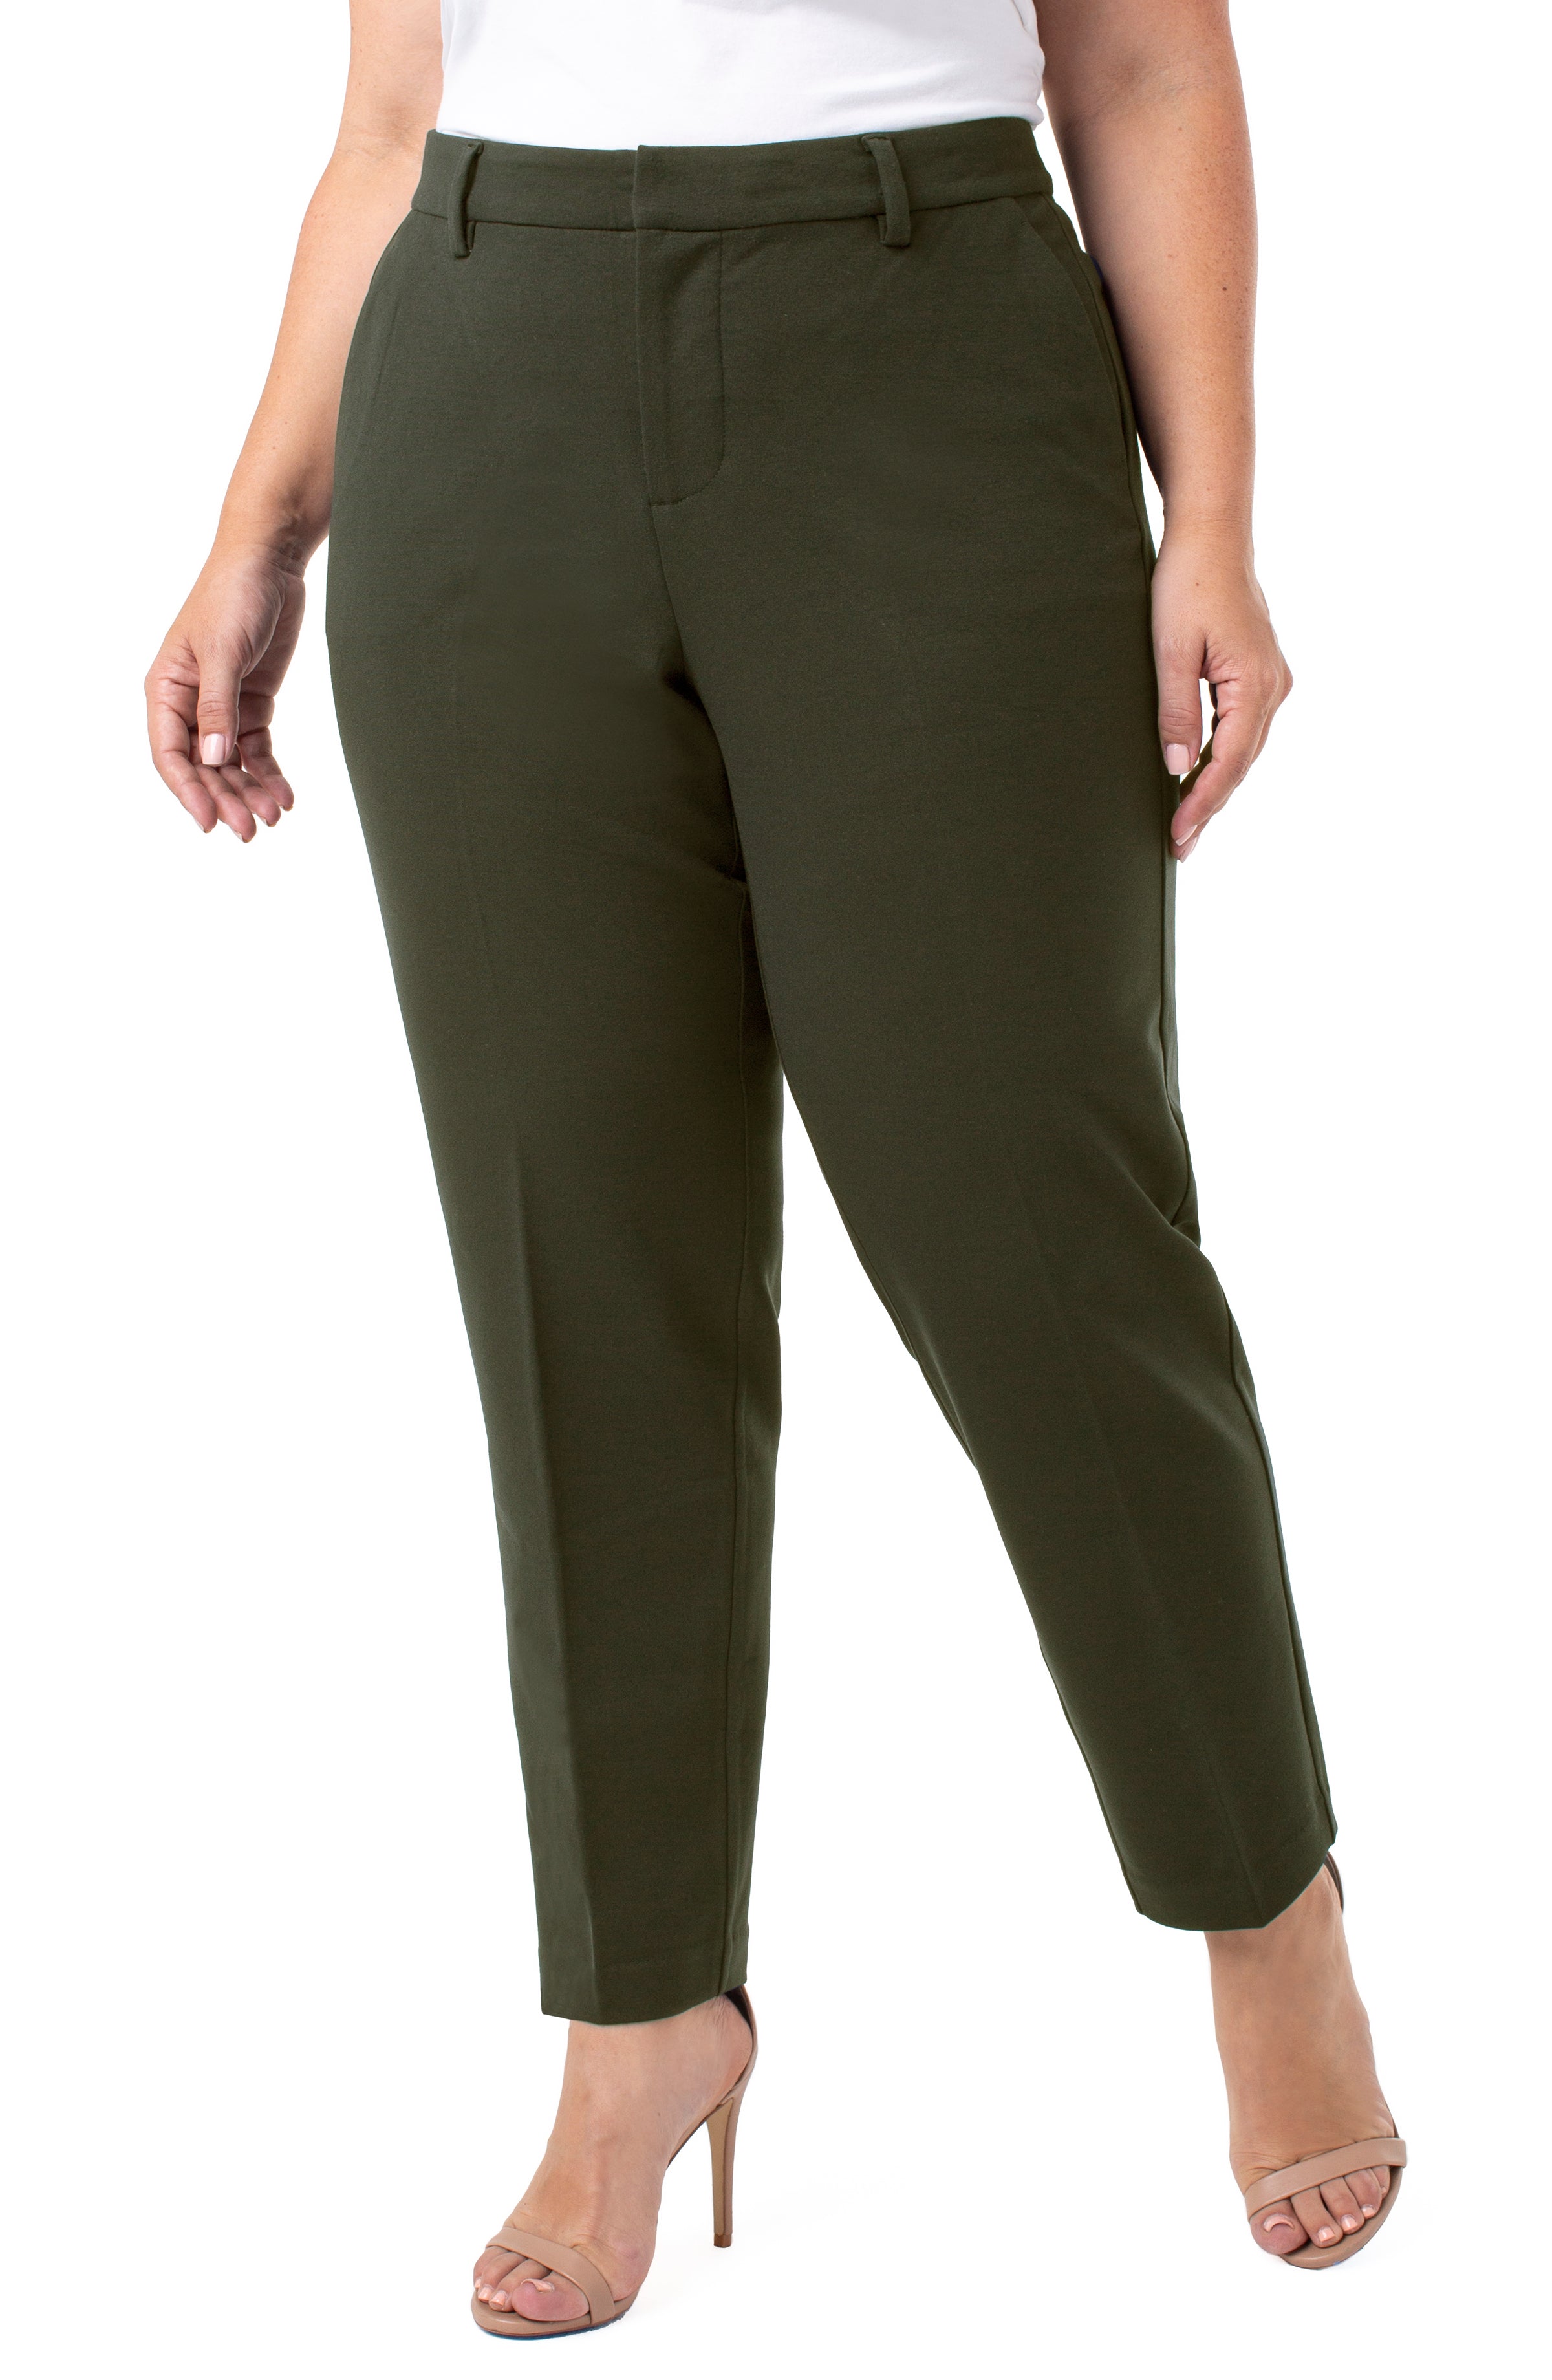 LUCY Women’s Wide Leg Activewear Hiking Pants Stretch Olive Size 4